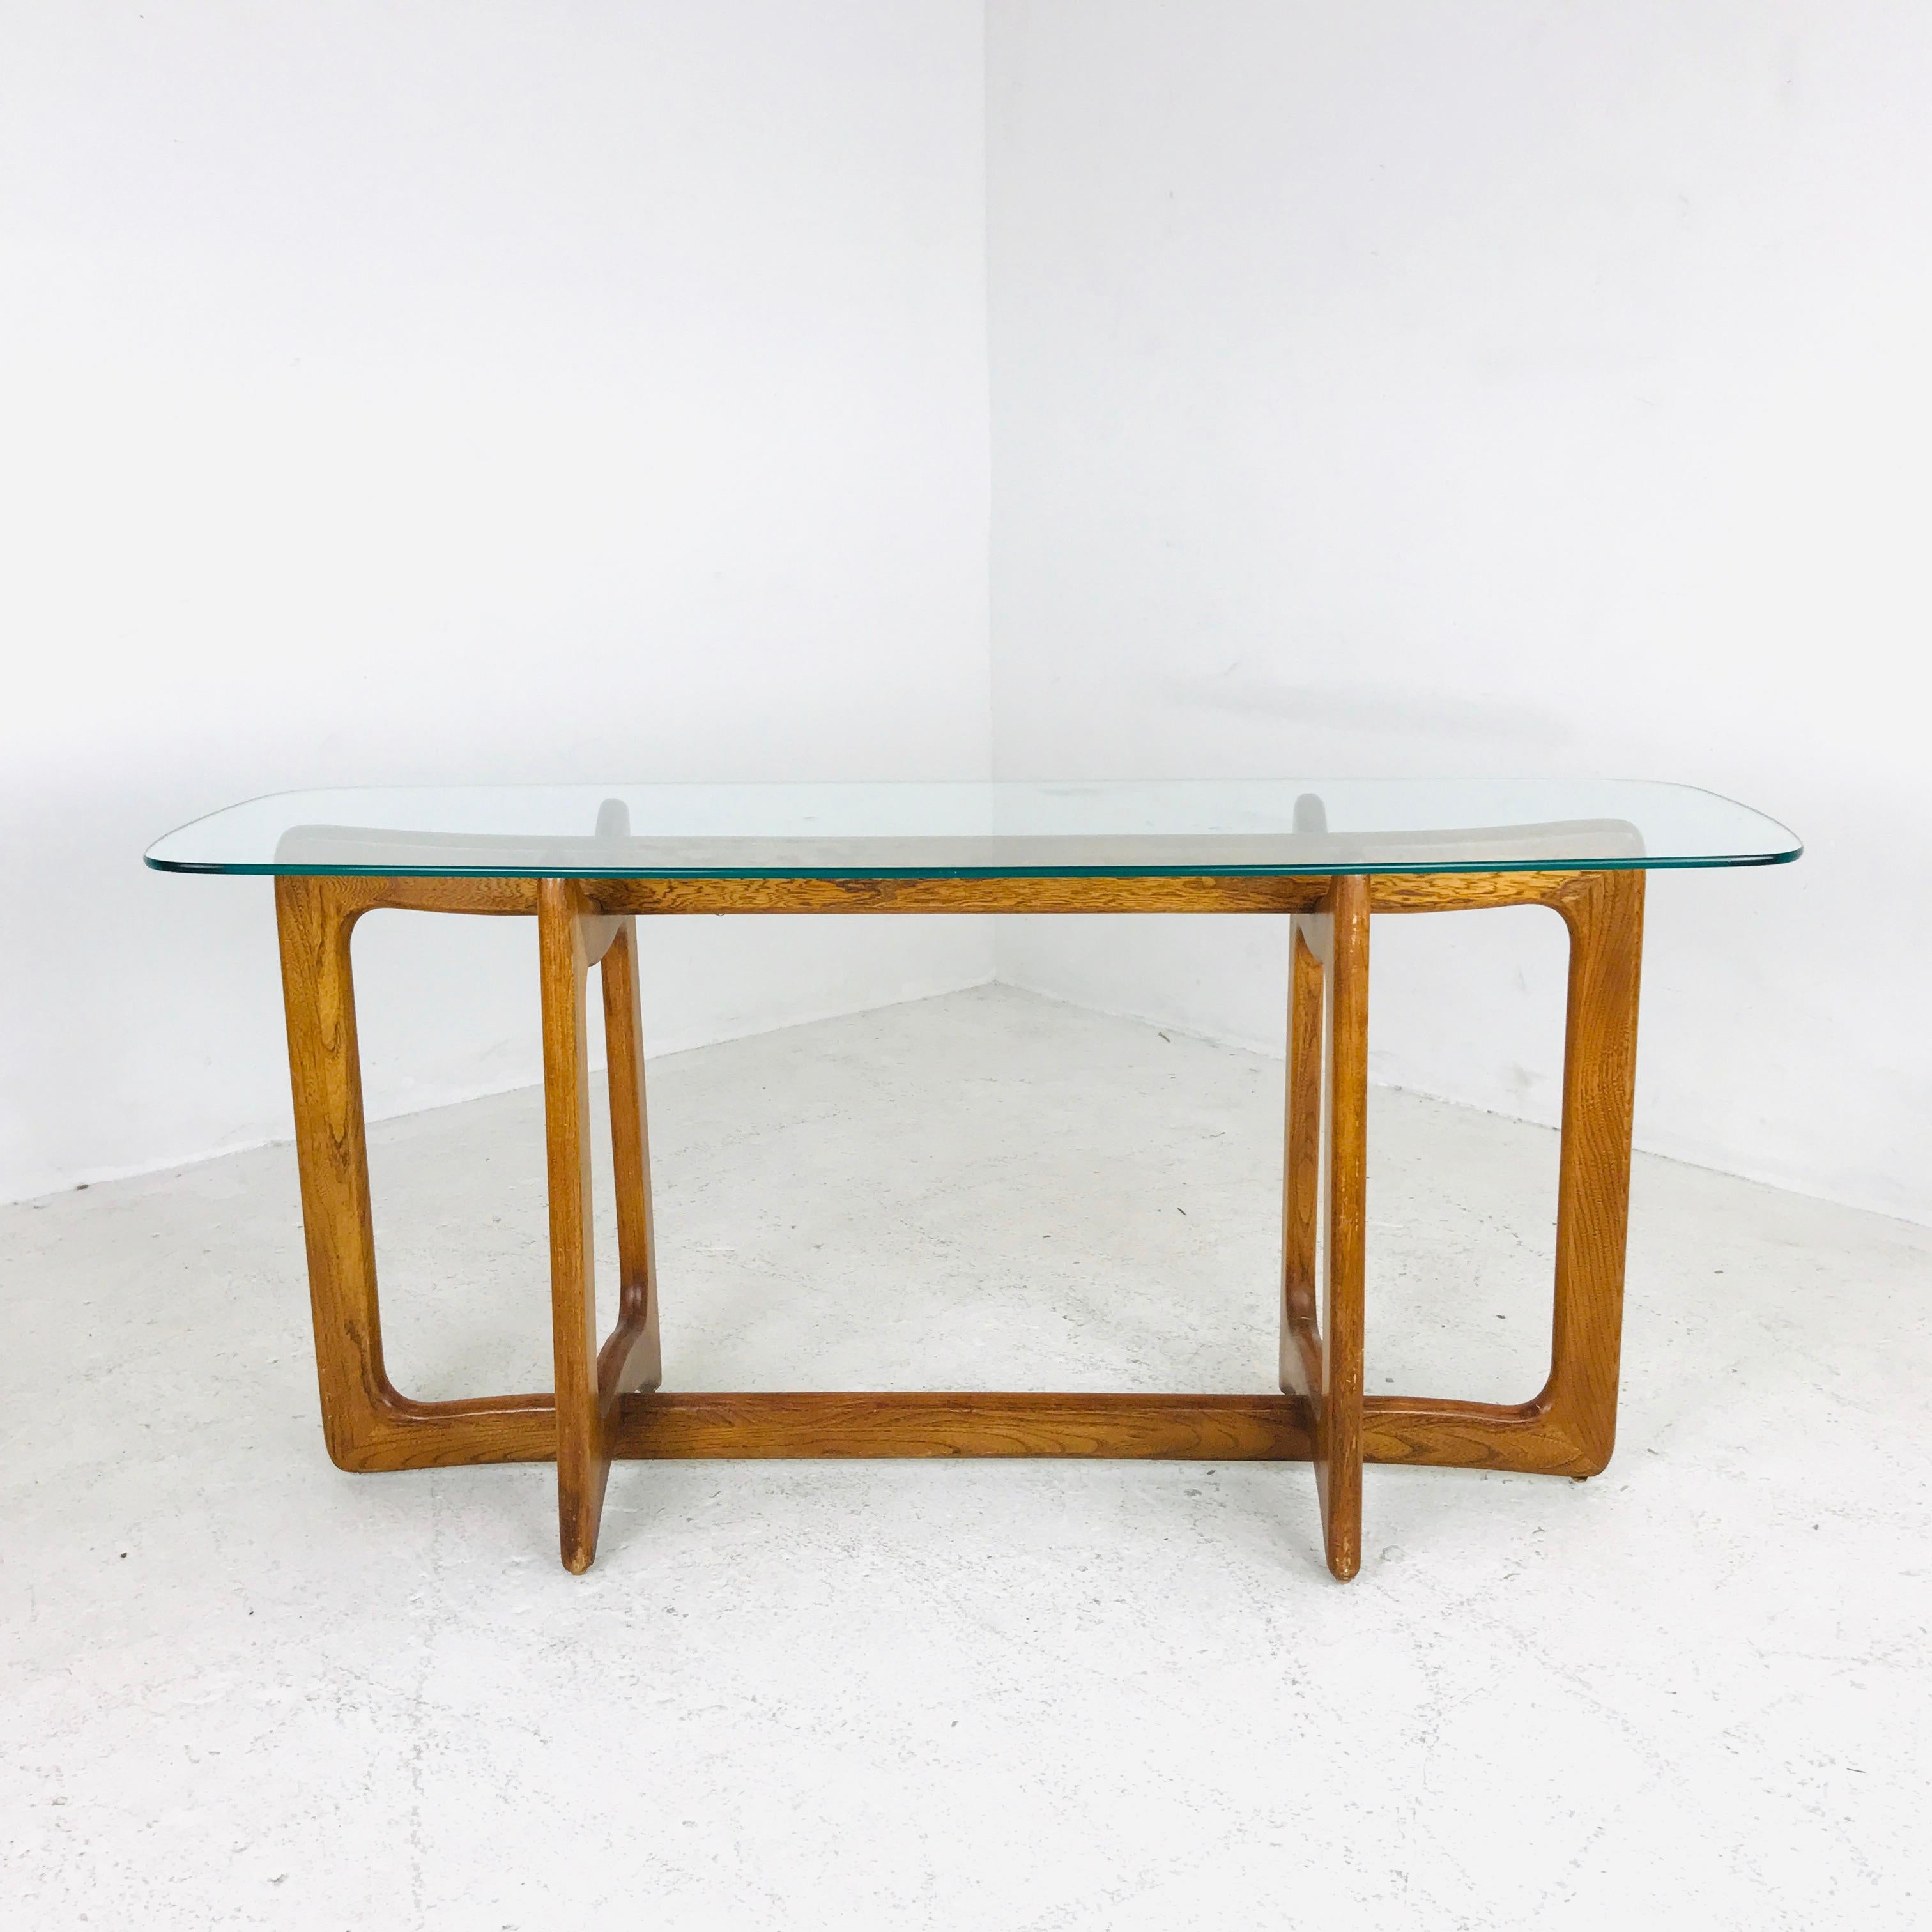 Mid-Century Modern console or sofa table designed by Adrian Pearsall for Craft Associates, circa 1960s. Gorgeous sculptural walnut base and glass top.